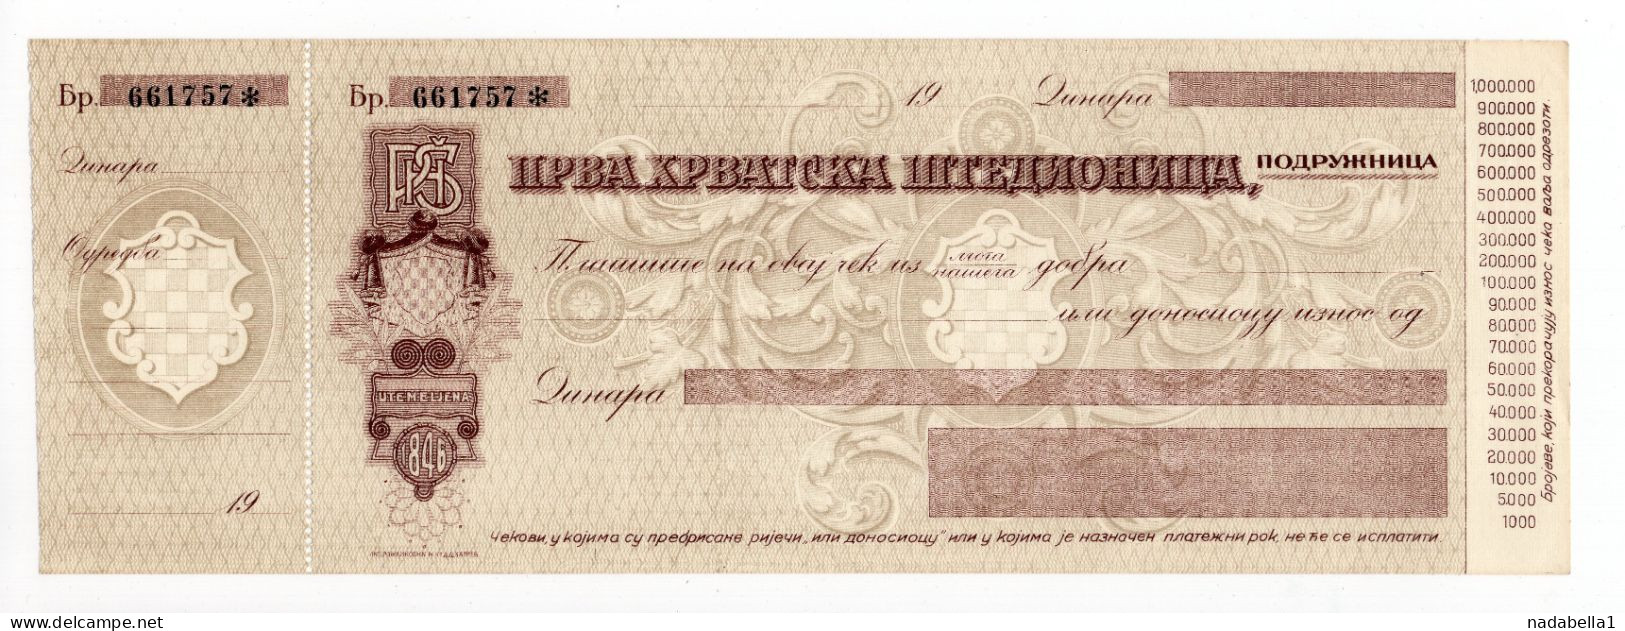 1920? KINGDOM OF SHS,CROATIA,CHEQUE,FIRST CROATIAN SAVINGS BANK,ESTABLISHED IN 1846.CYRILLIC TEXT - Cheques & Traveler's Cheques